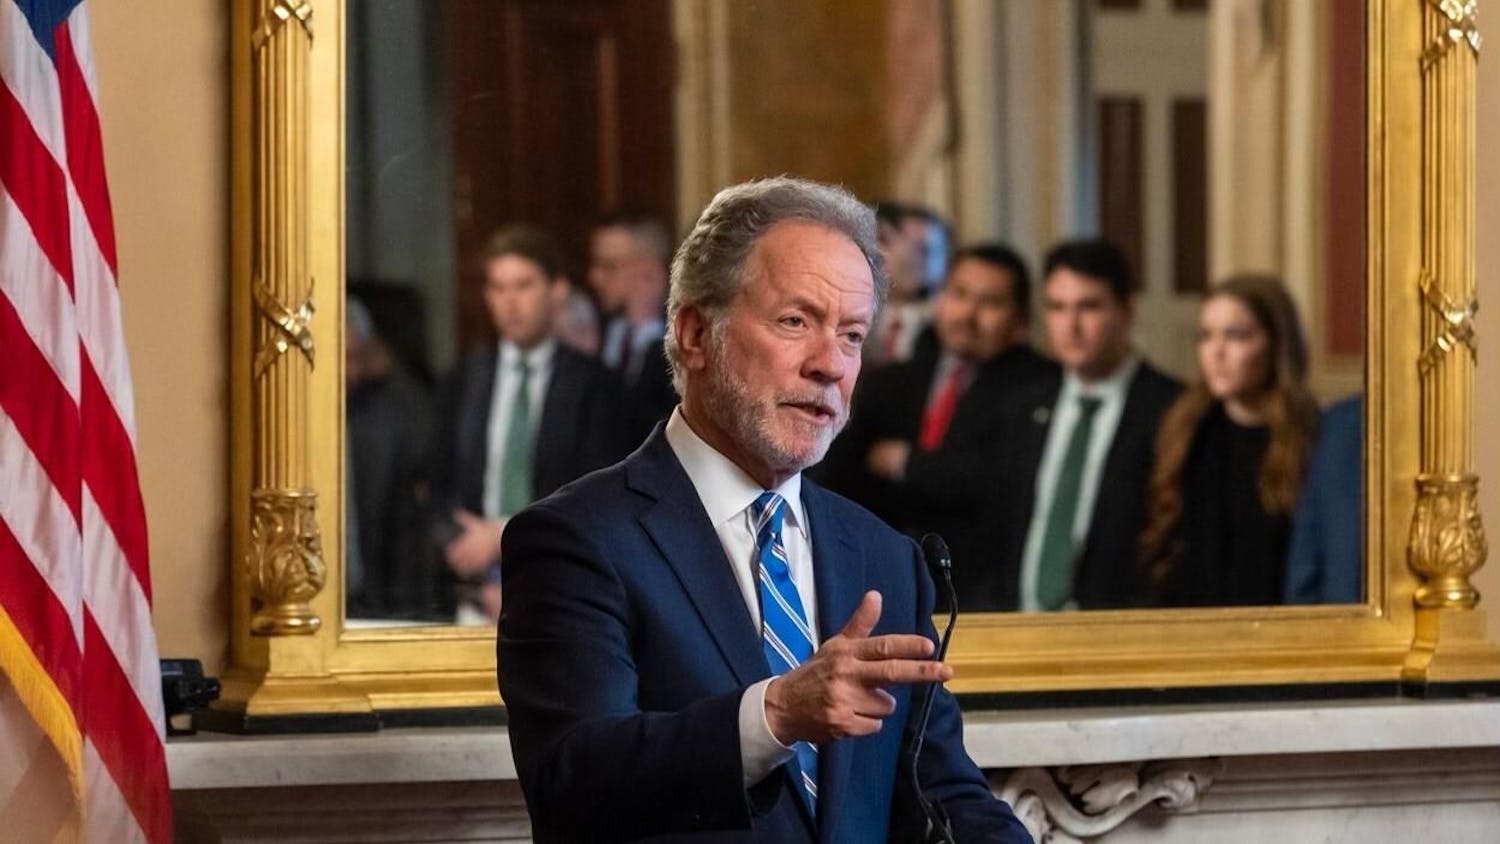 Former South Carolina Gov. David Beasley at the South Carolina Statehouse in Columbia, South Carolina. Beasley joined the ɫɫƵ Joseph F. Rice School of Law on March 1 as a faculty professor in the Department of Legal Studies.